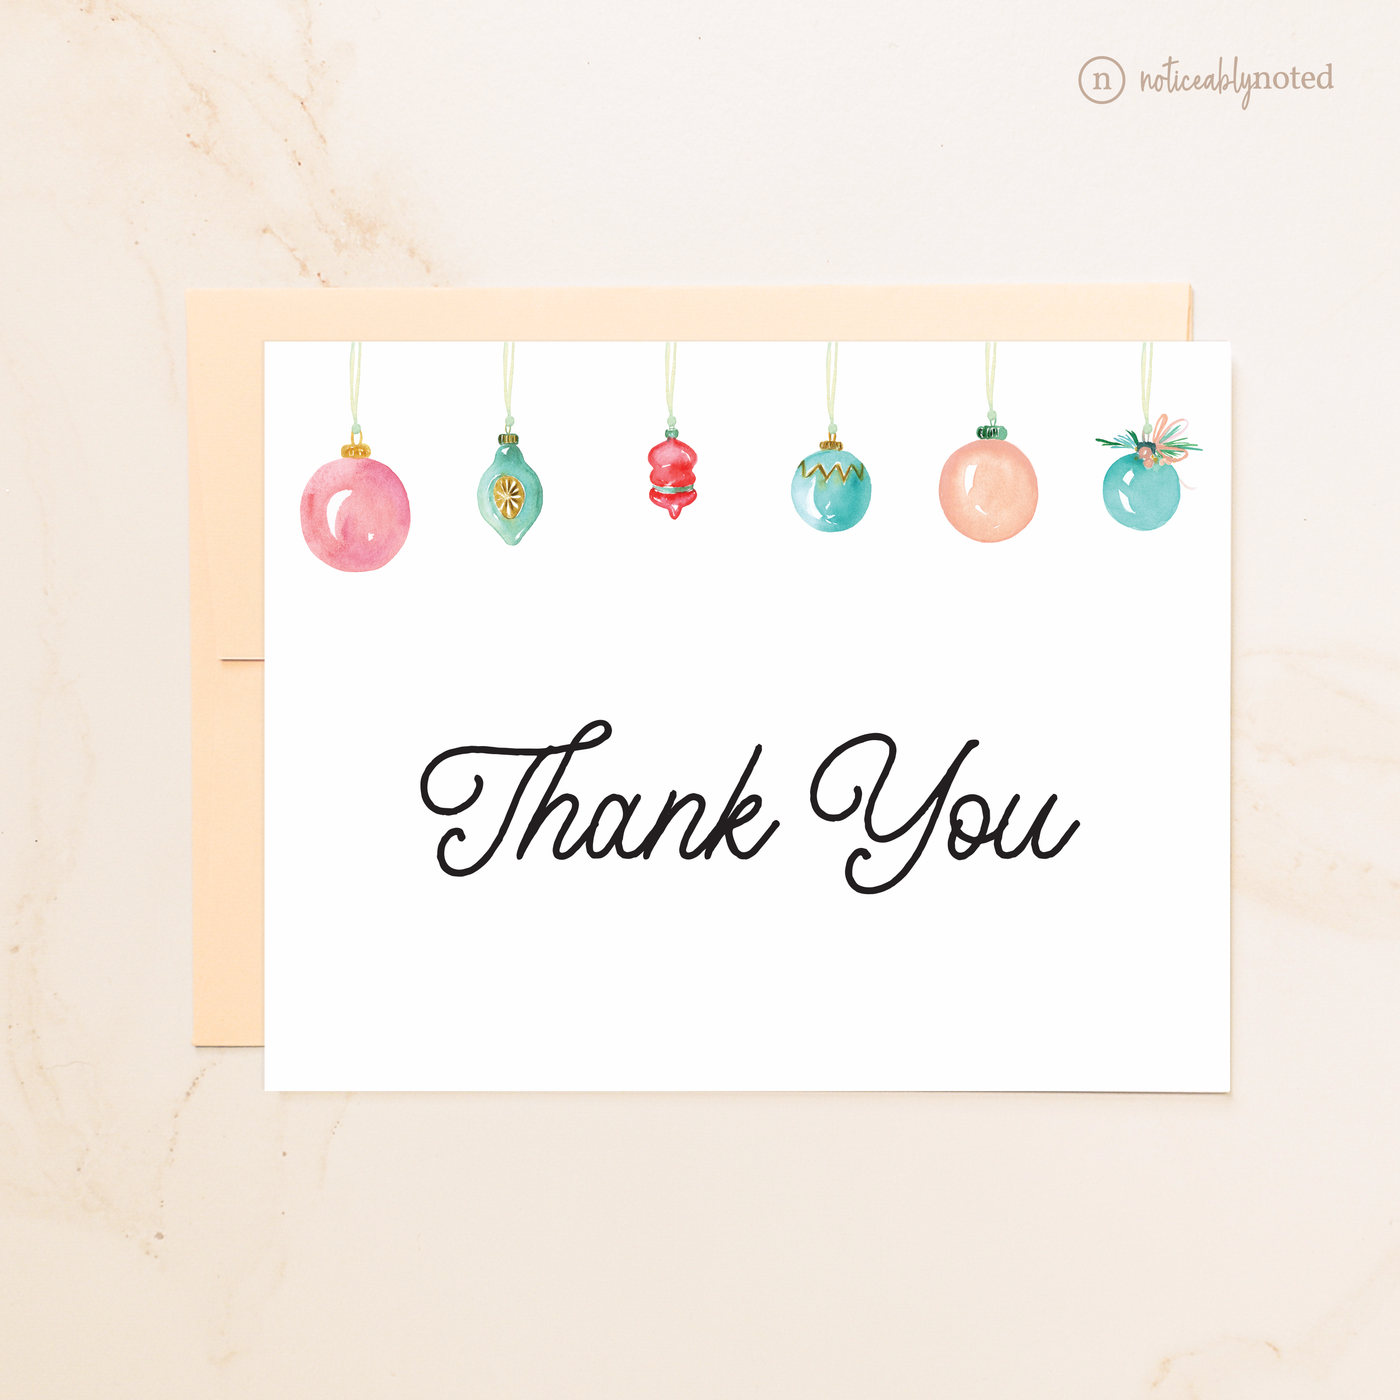 Ornaments Thank You Cards | Noticeably Noted